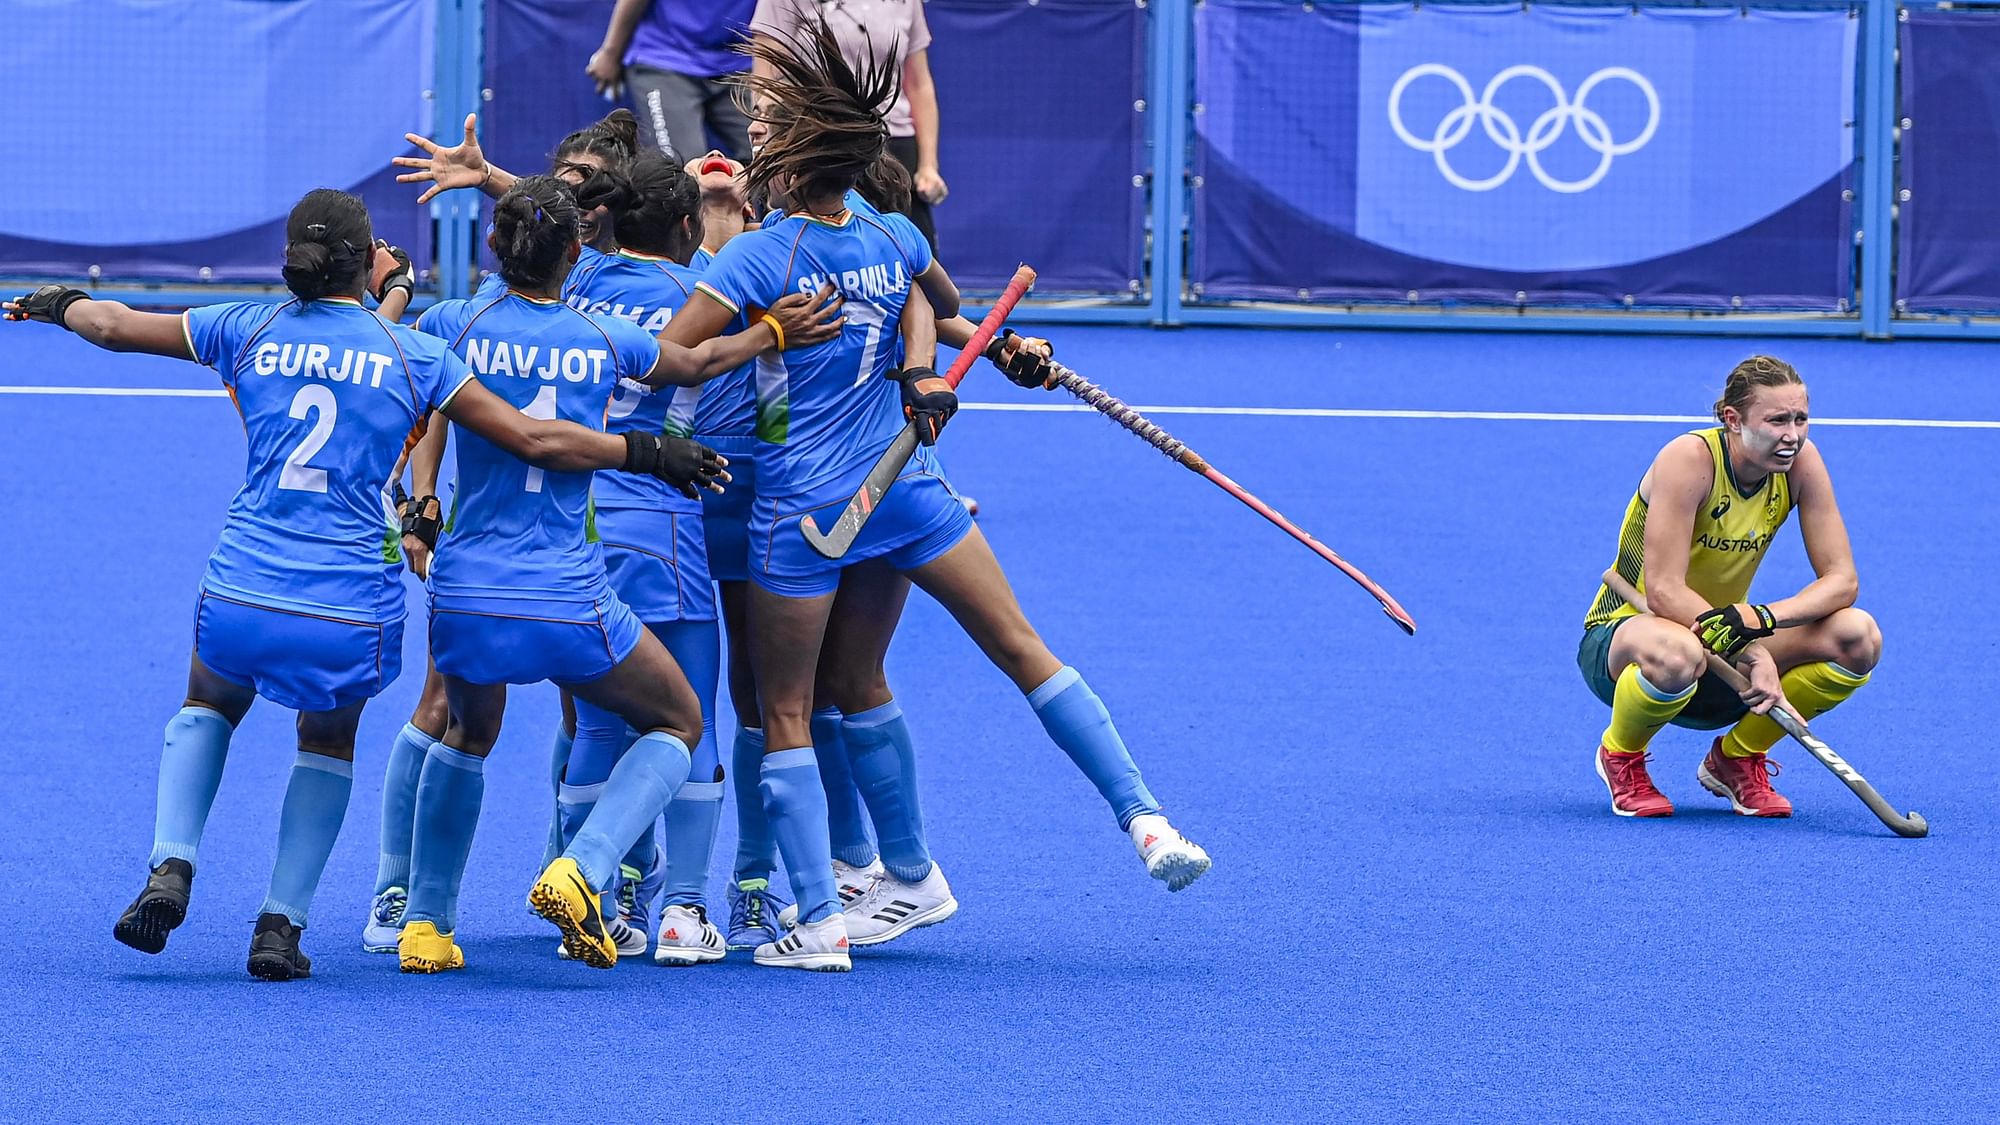 <div class="paragraphs"><p>The Indian women's hockey team beat world number 2 Australia to enter their first-ever Olympics semi-final.</p></div>